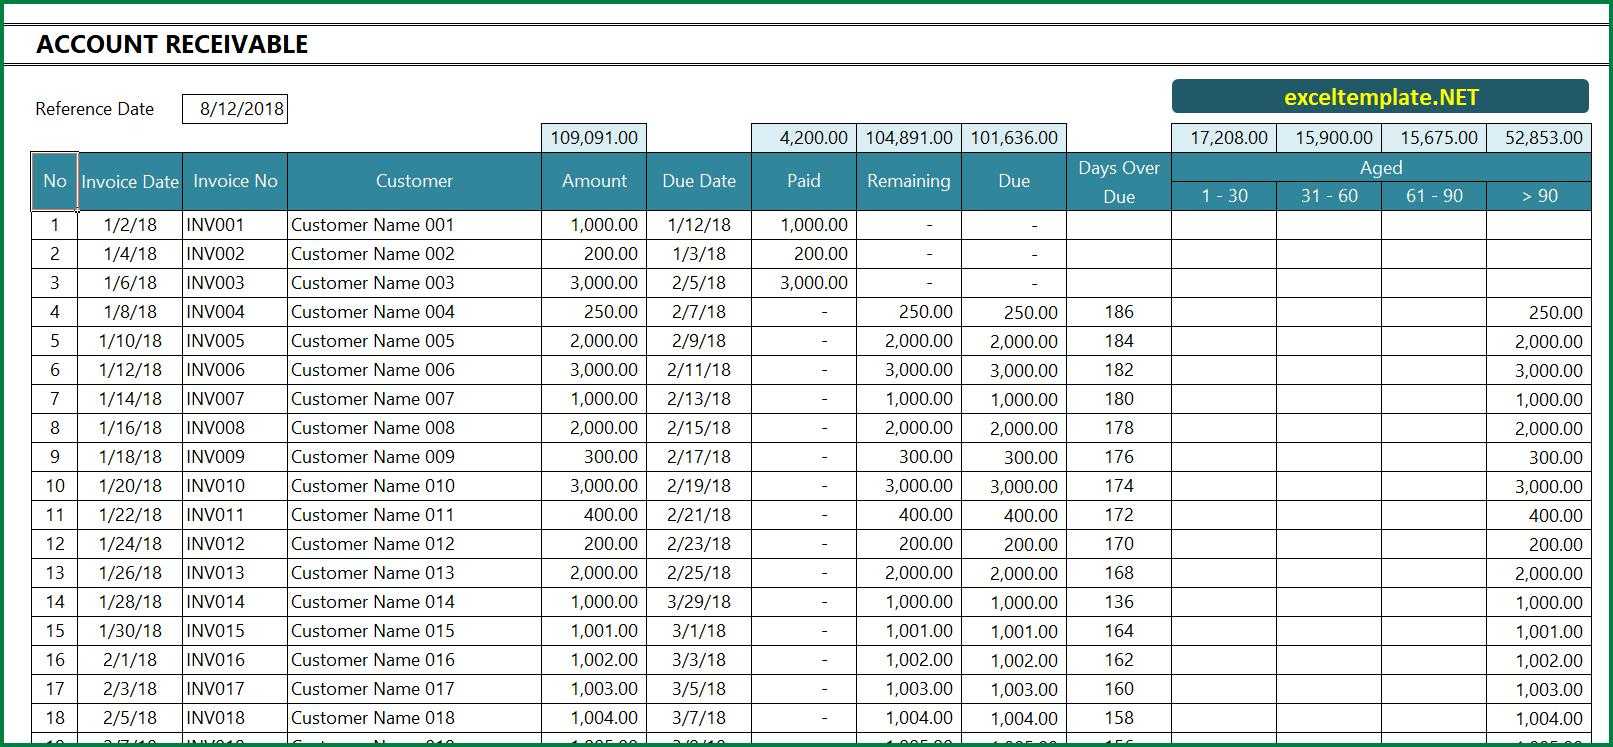 Account Receivable Excel Template In Accounts Receivable Report Template